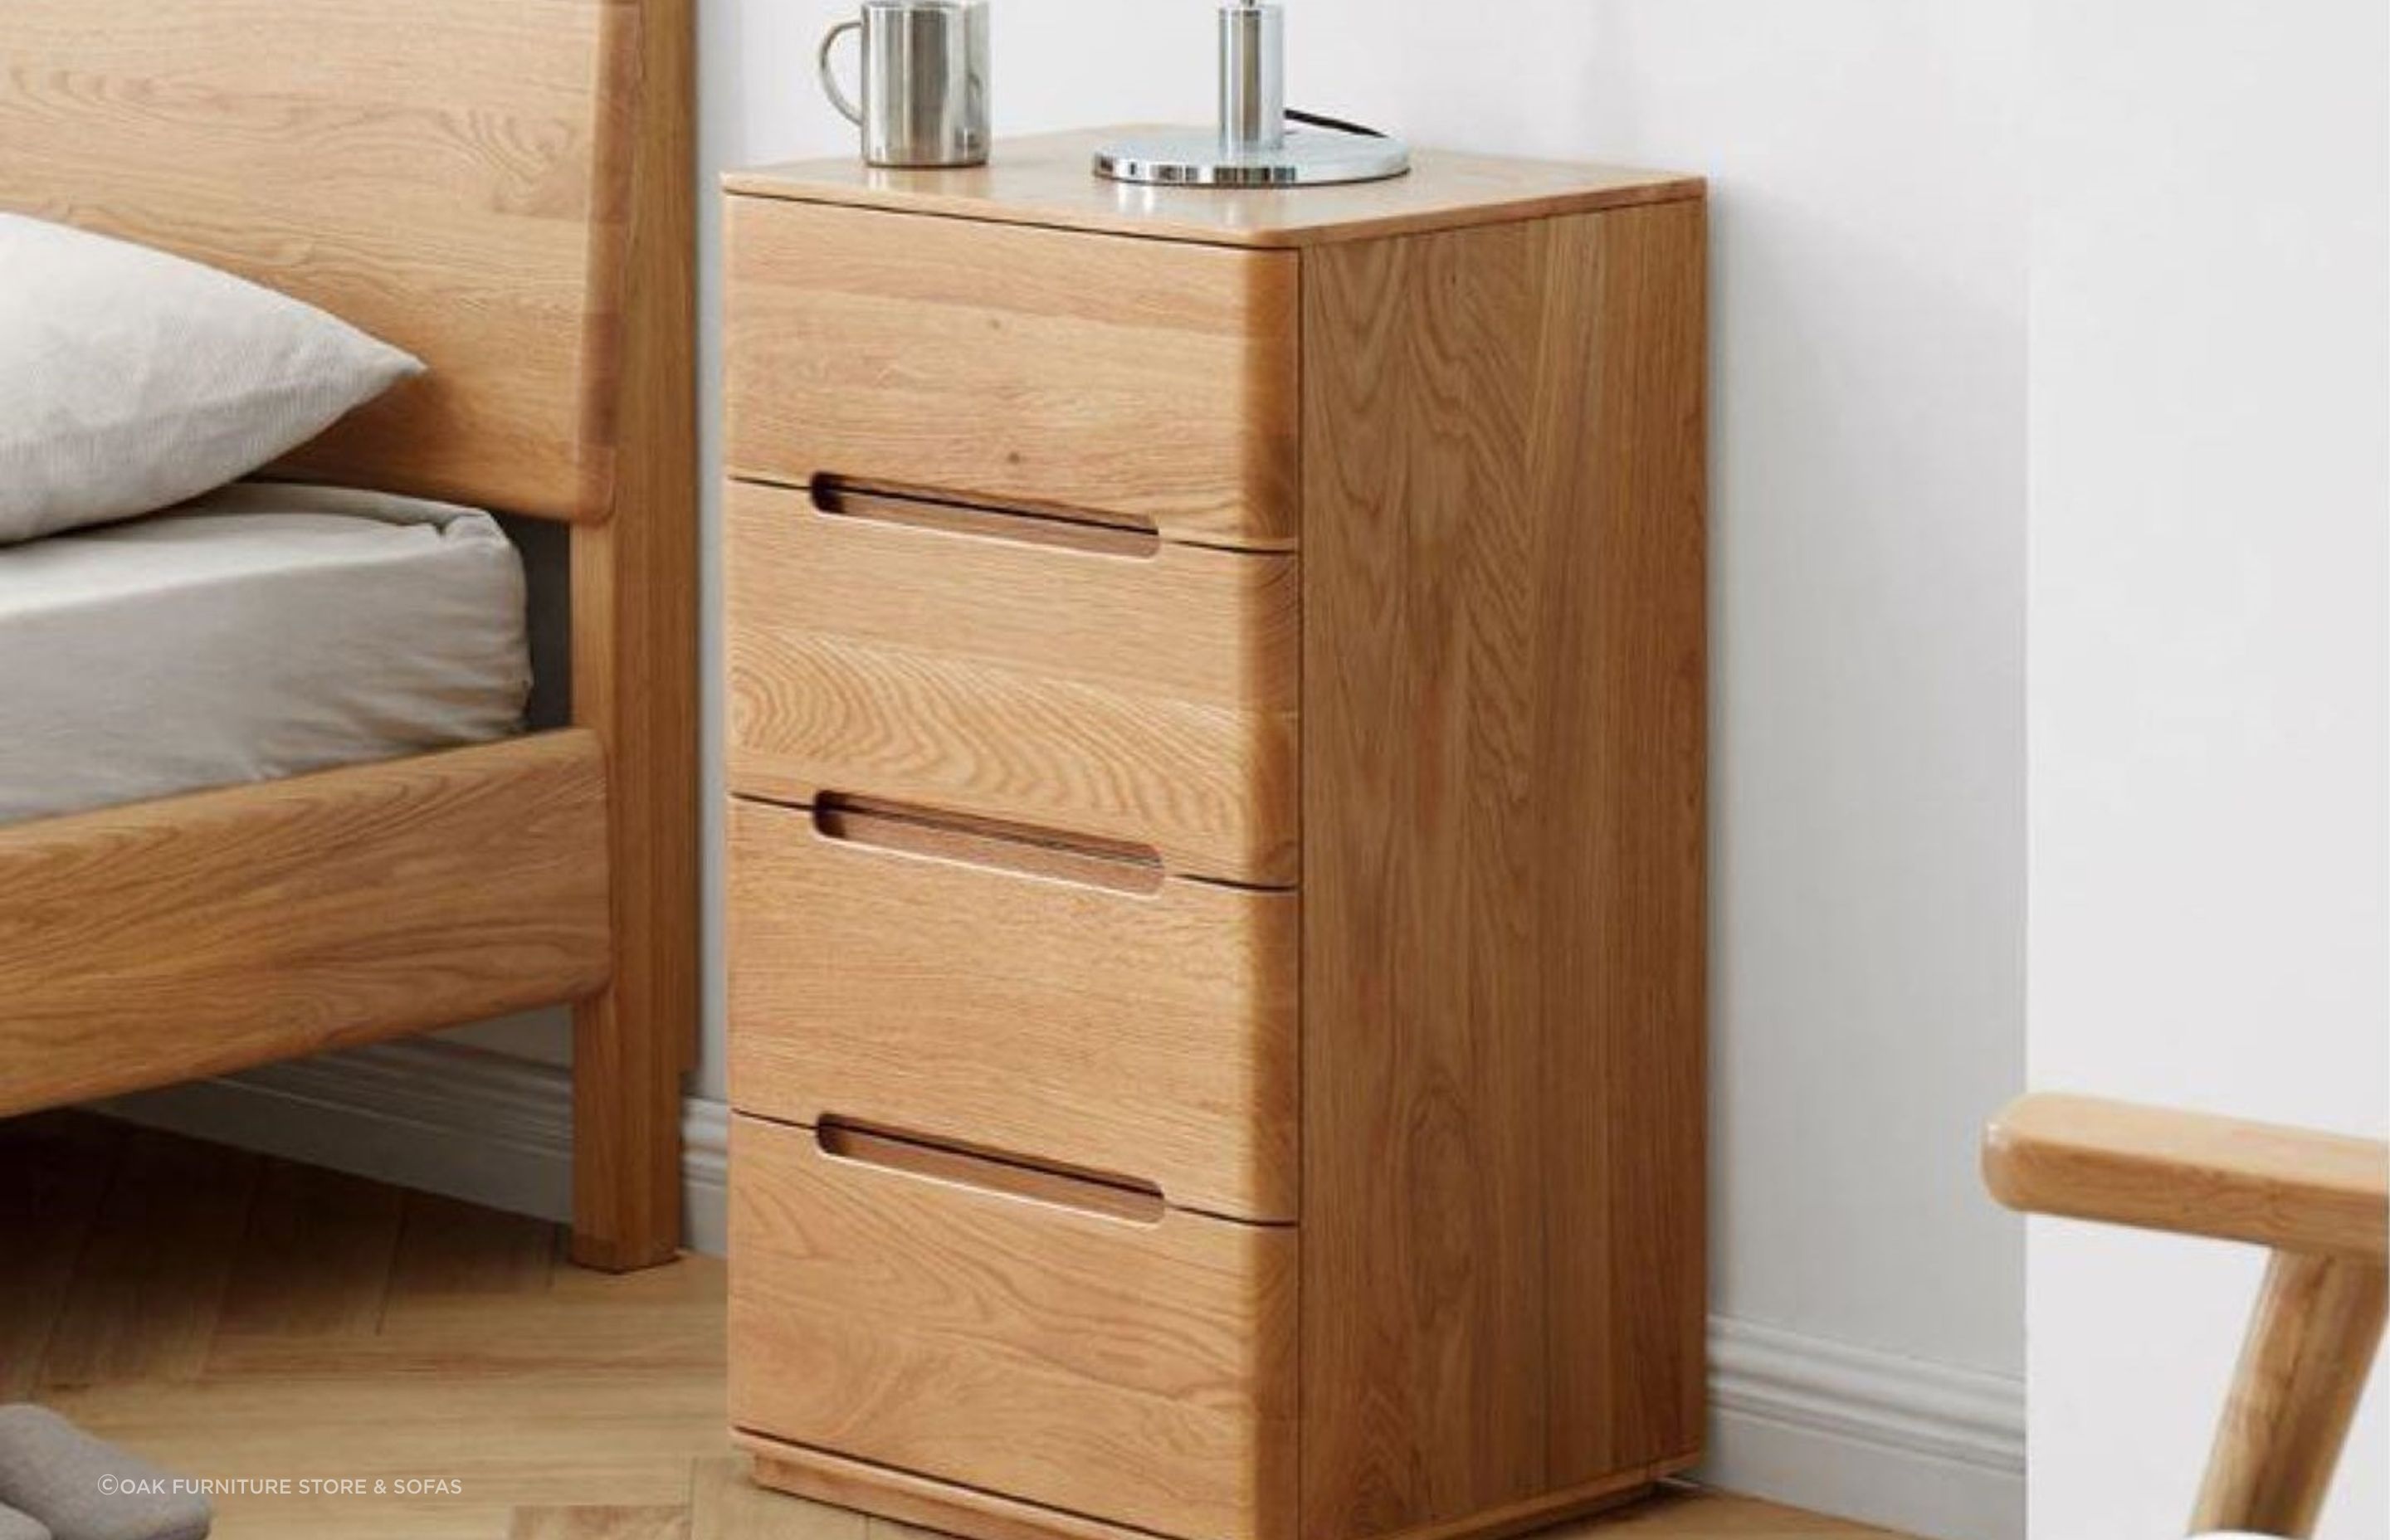 For a bit of extra storage and prominence, the Manchester Natural Solid Oak Tall Bedside Table makes a great choice.